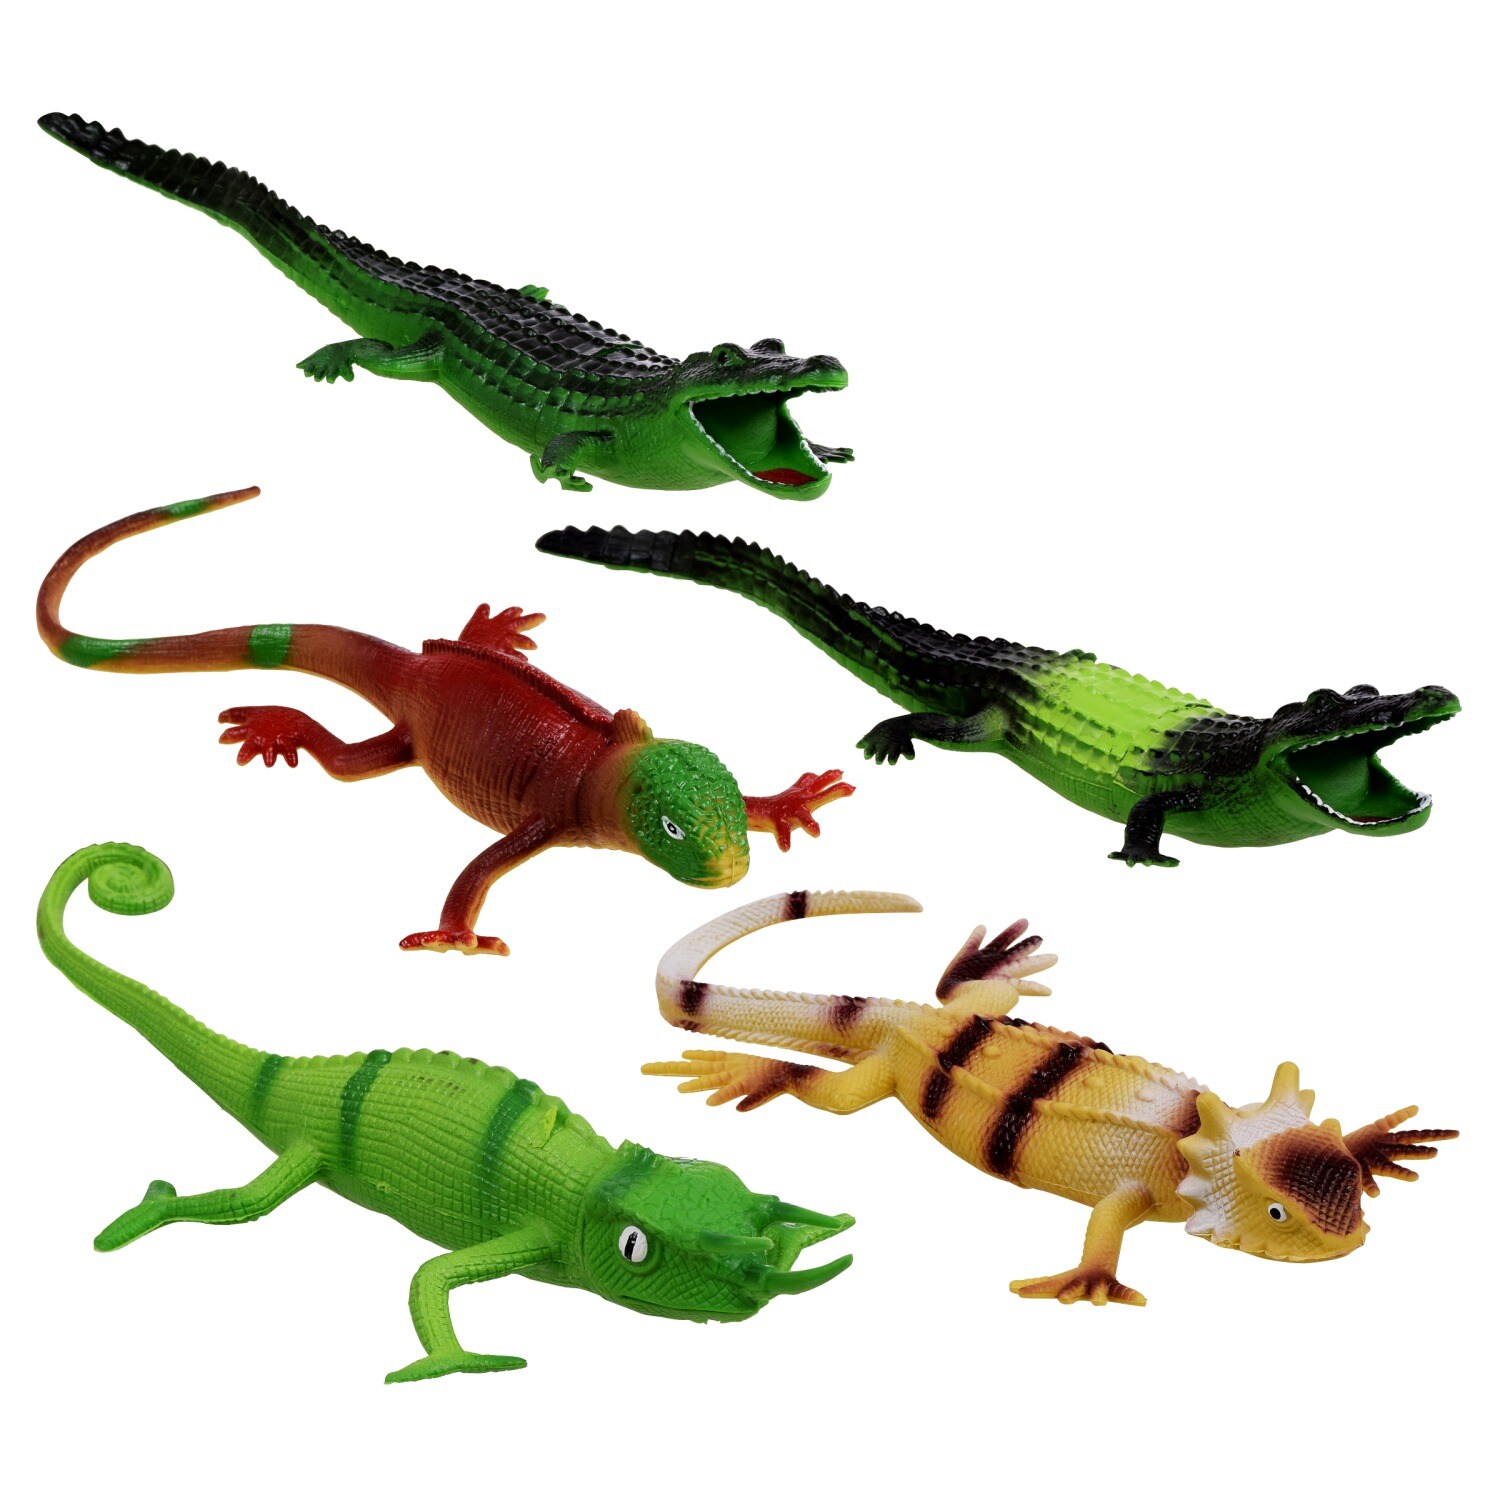 2 pack ASSORTED color PLAY 9 INCH RUBBER ALLIGATOR toy plastic pvc play GATORS